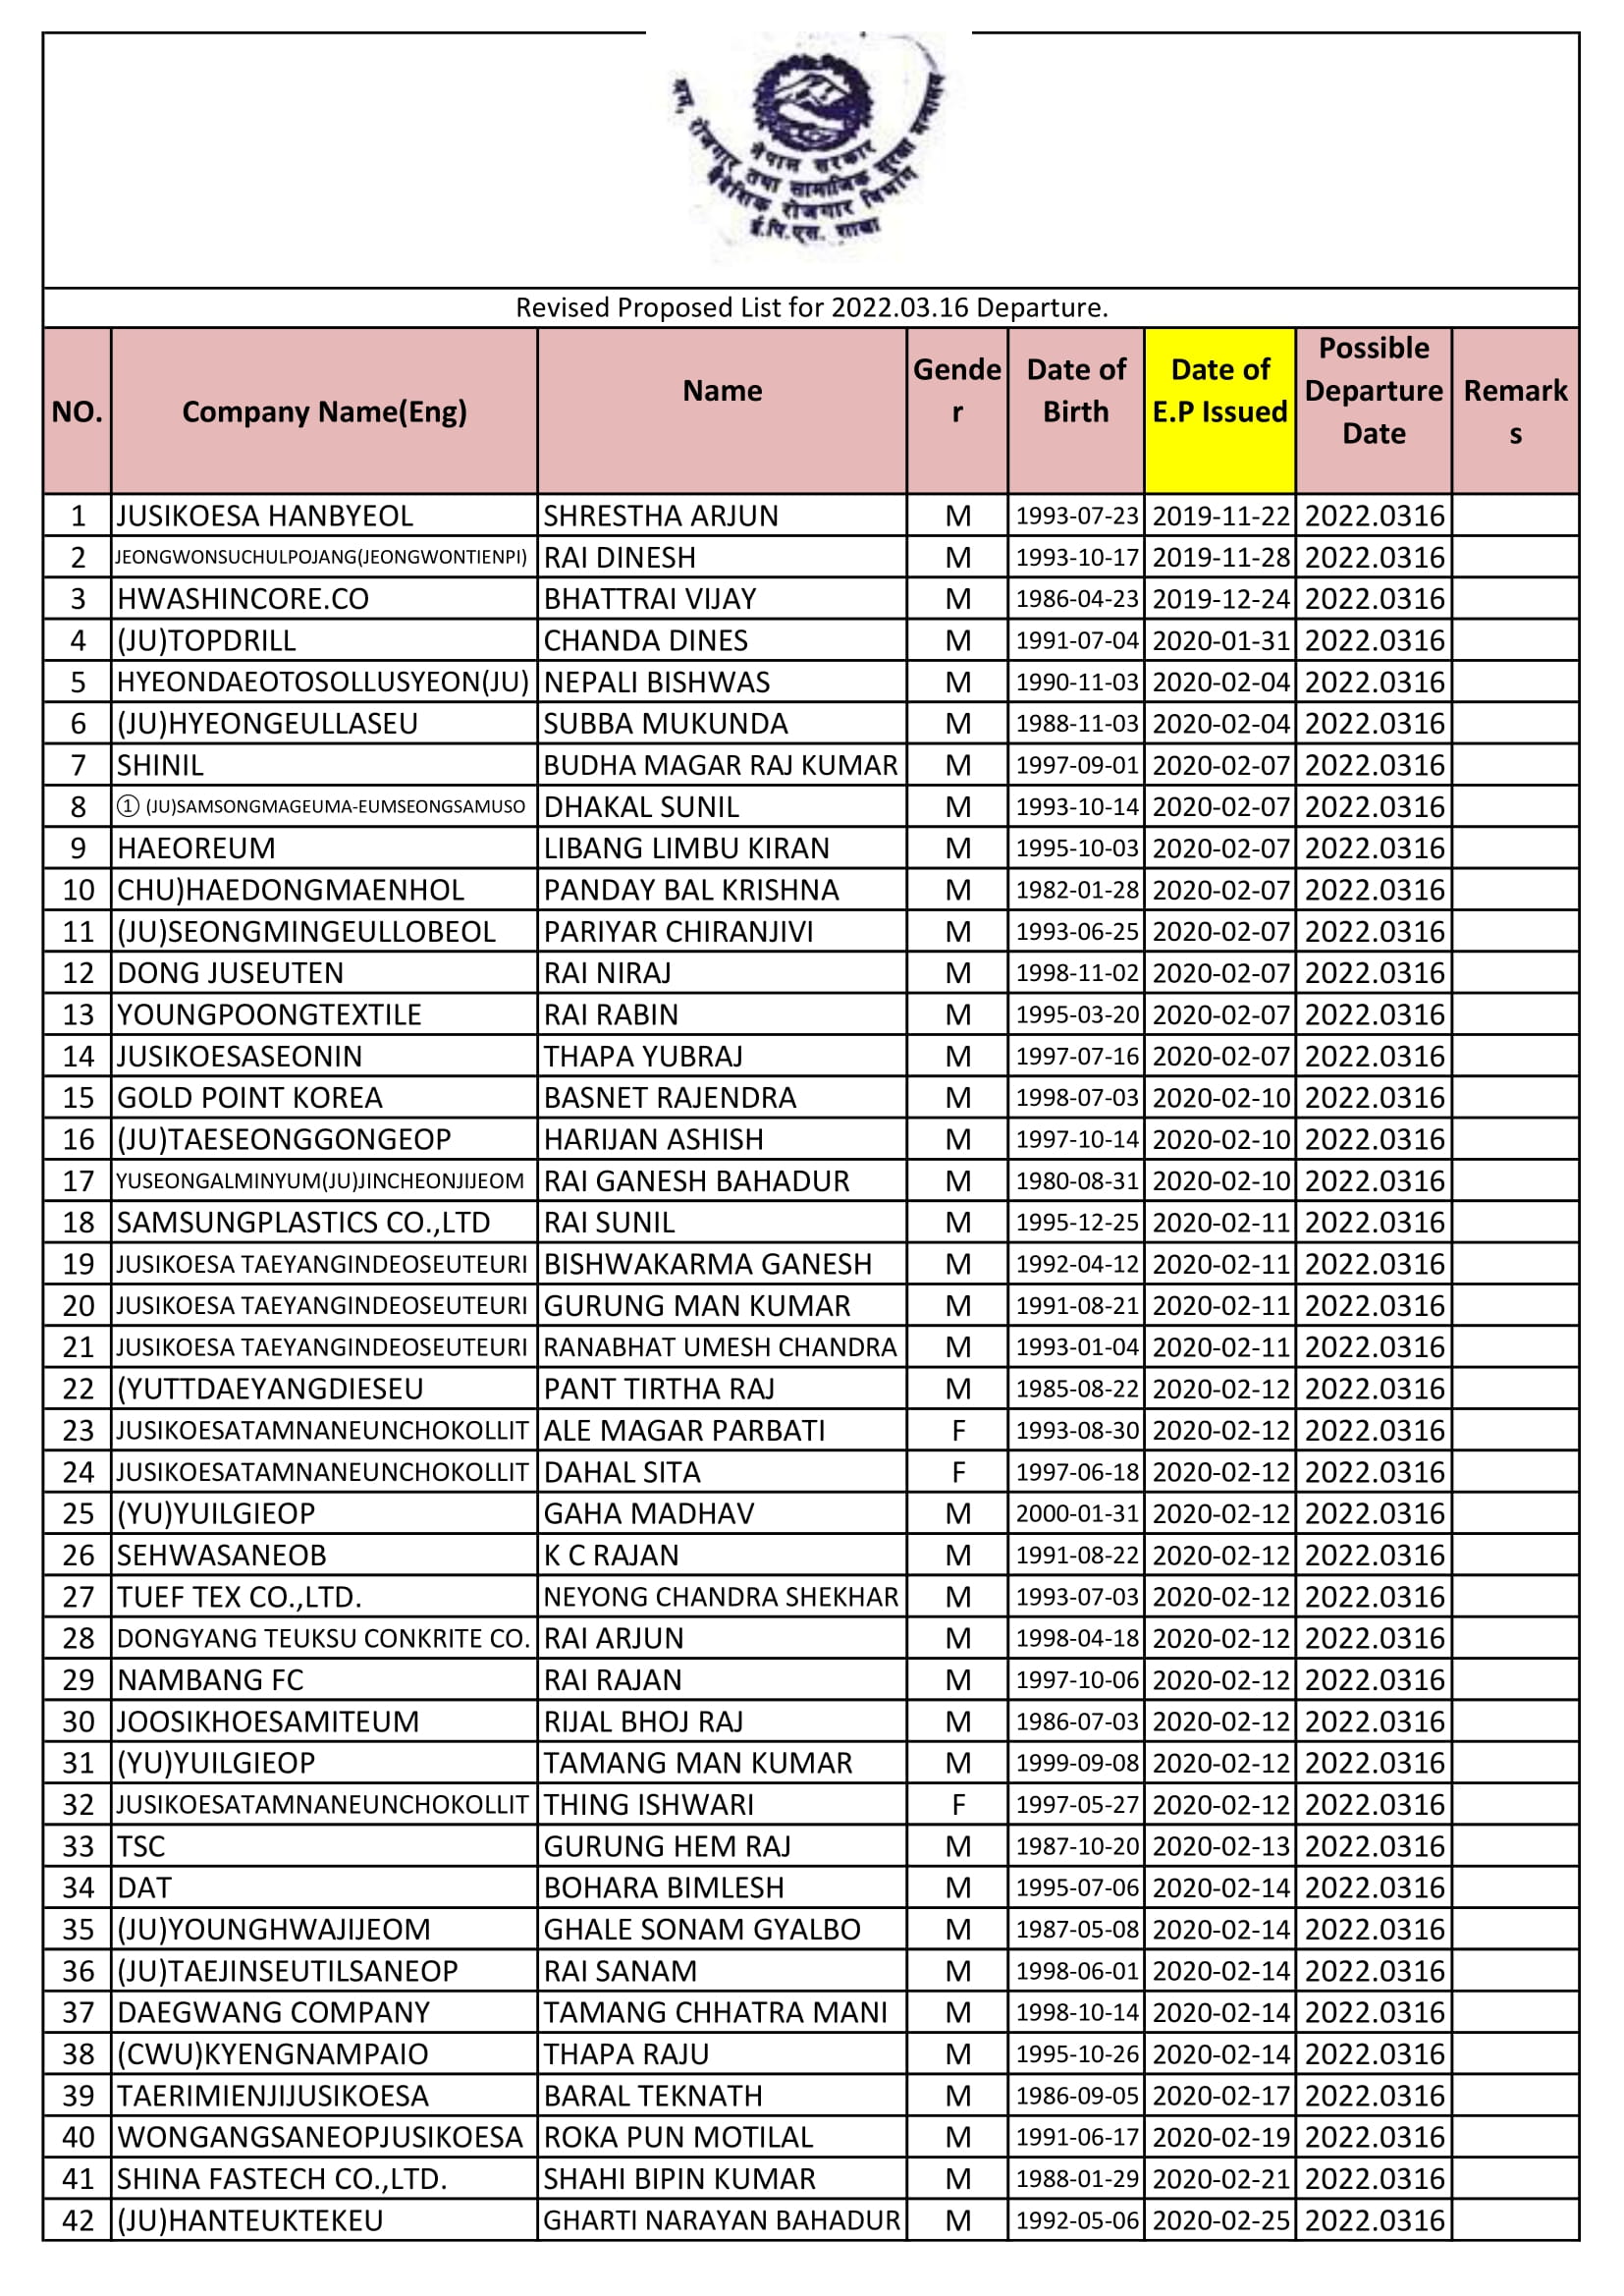 Revised Proposed Entry List of RW on 16 March 2022